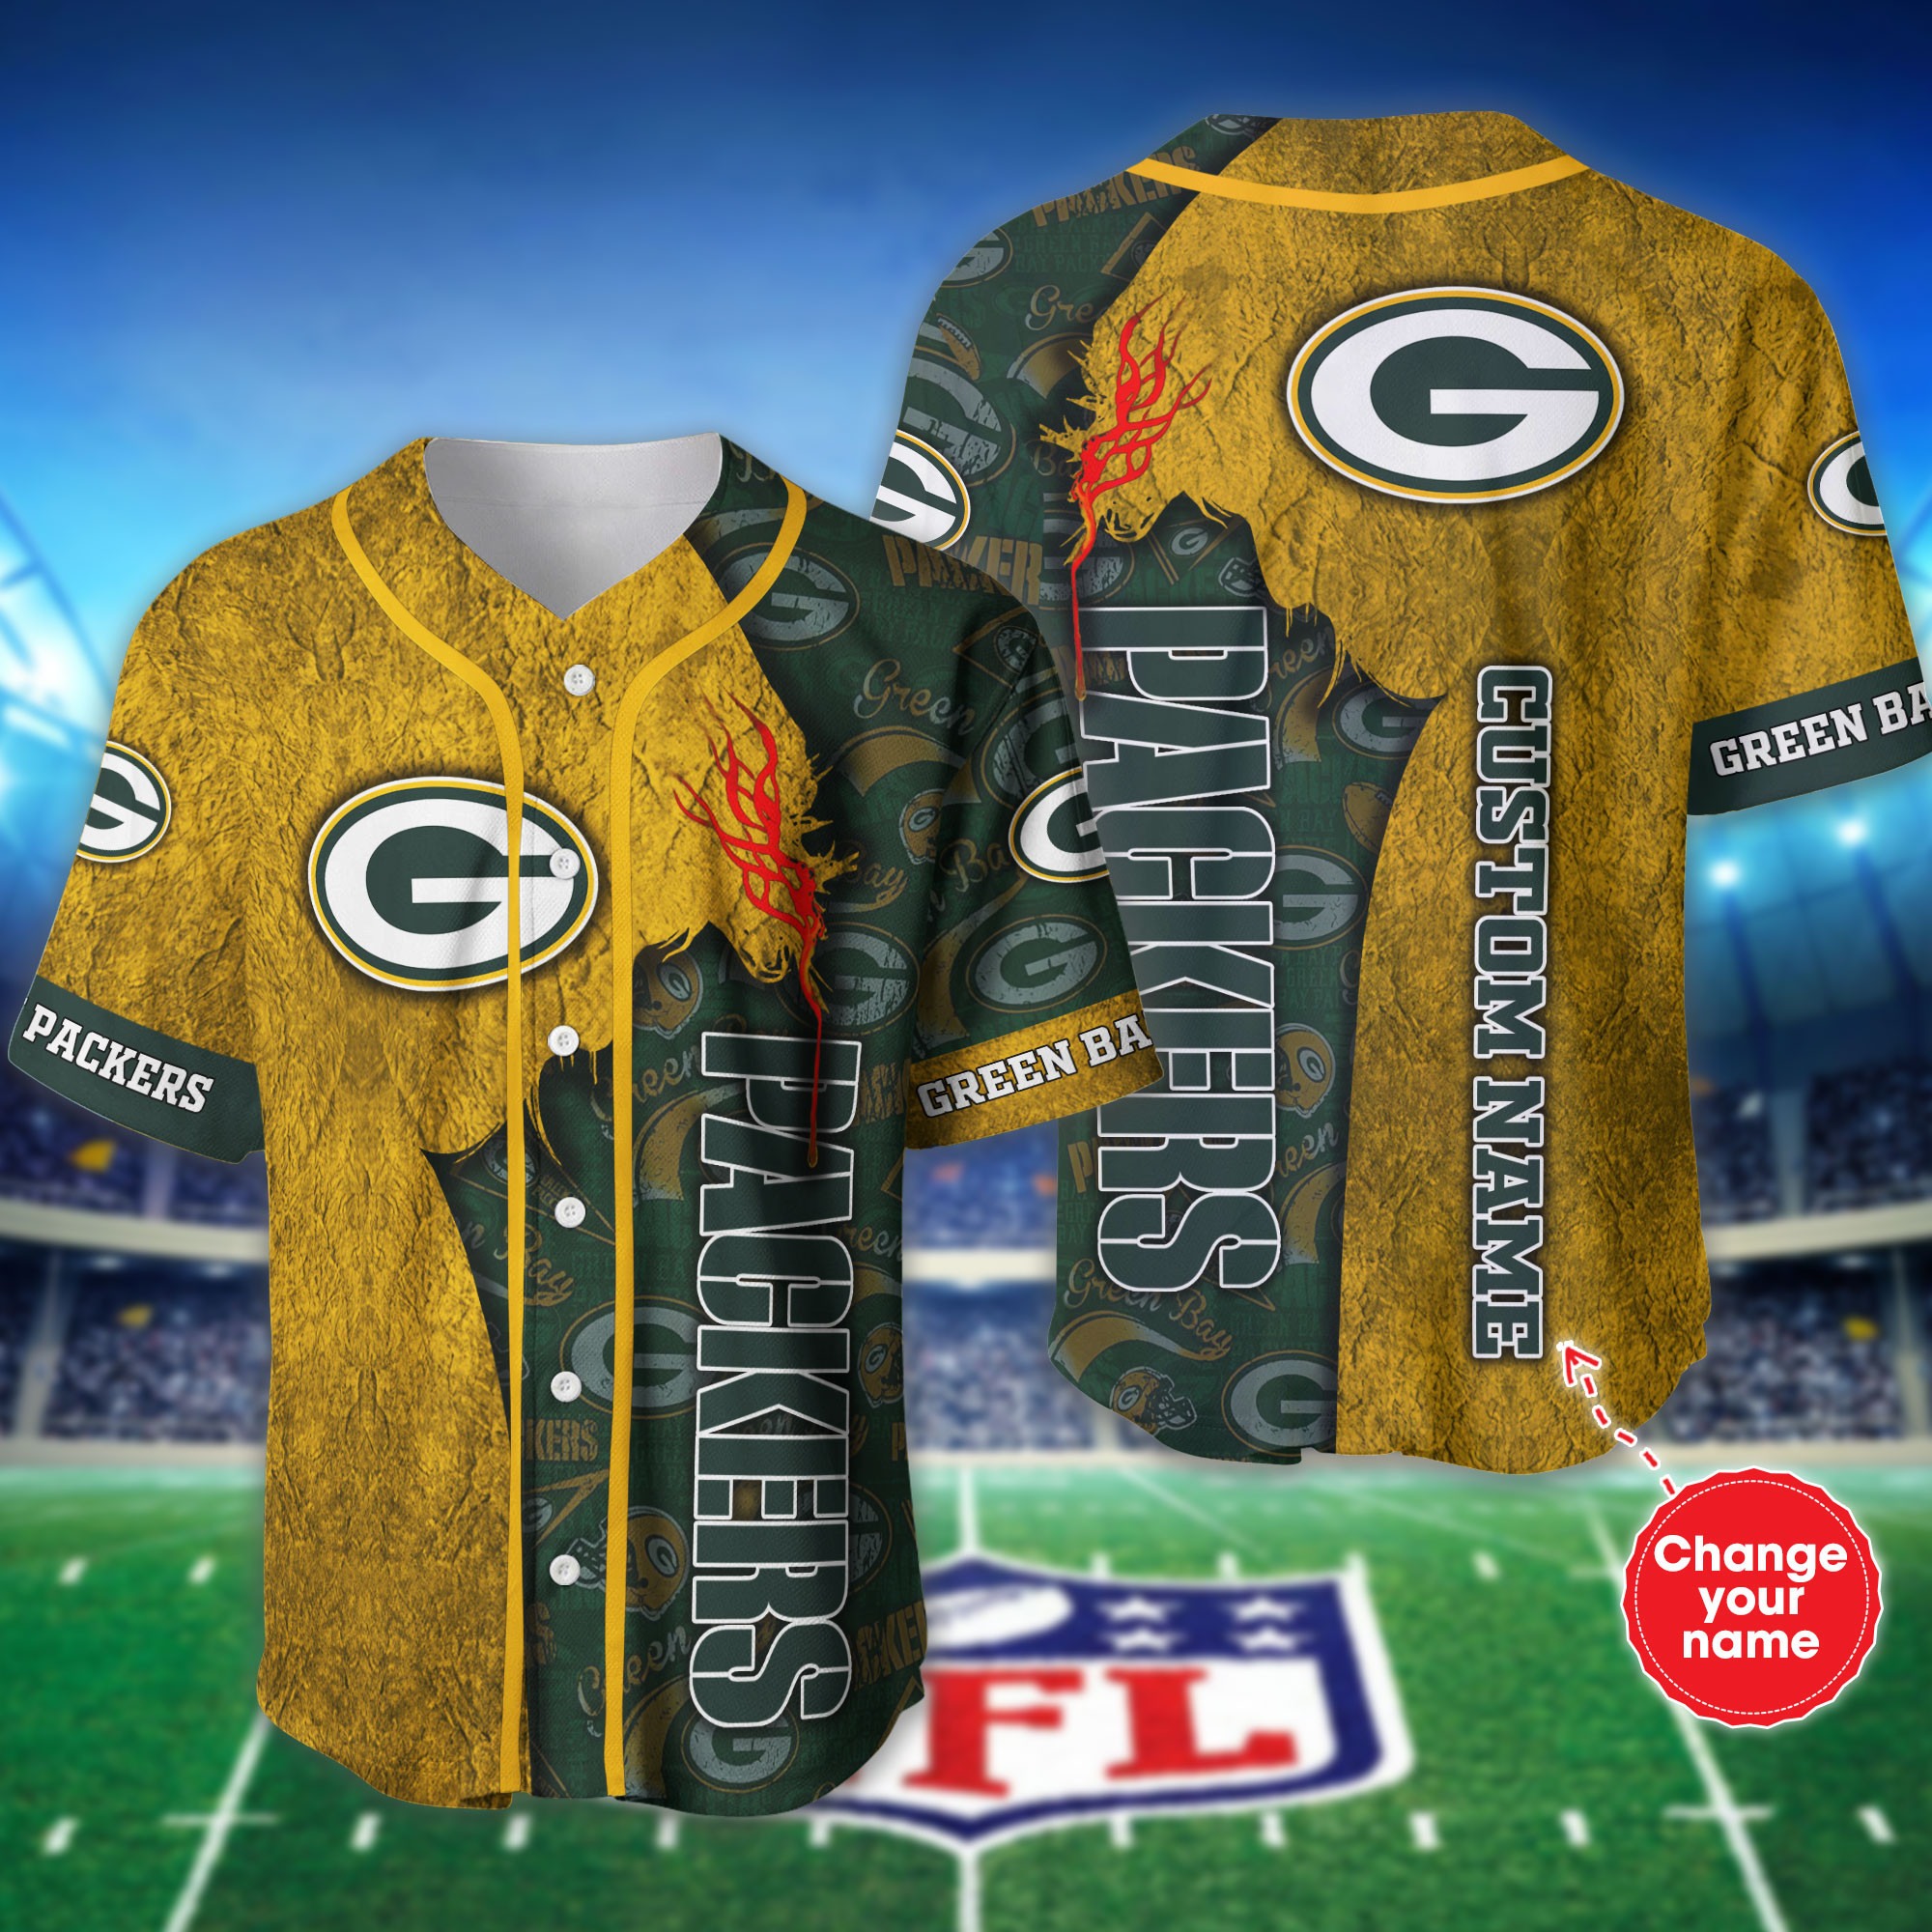 Personalized Green Bay Packers Baseball Jersey shirt for fans